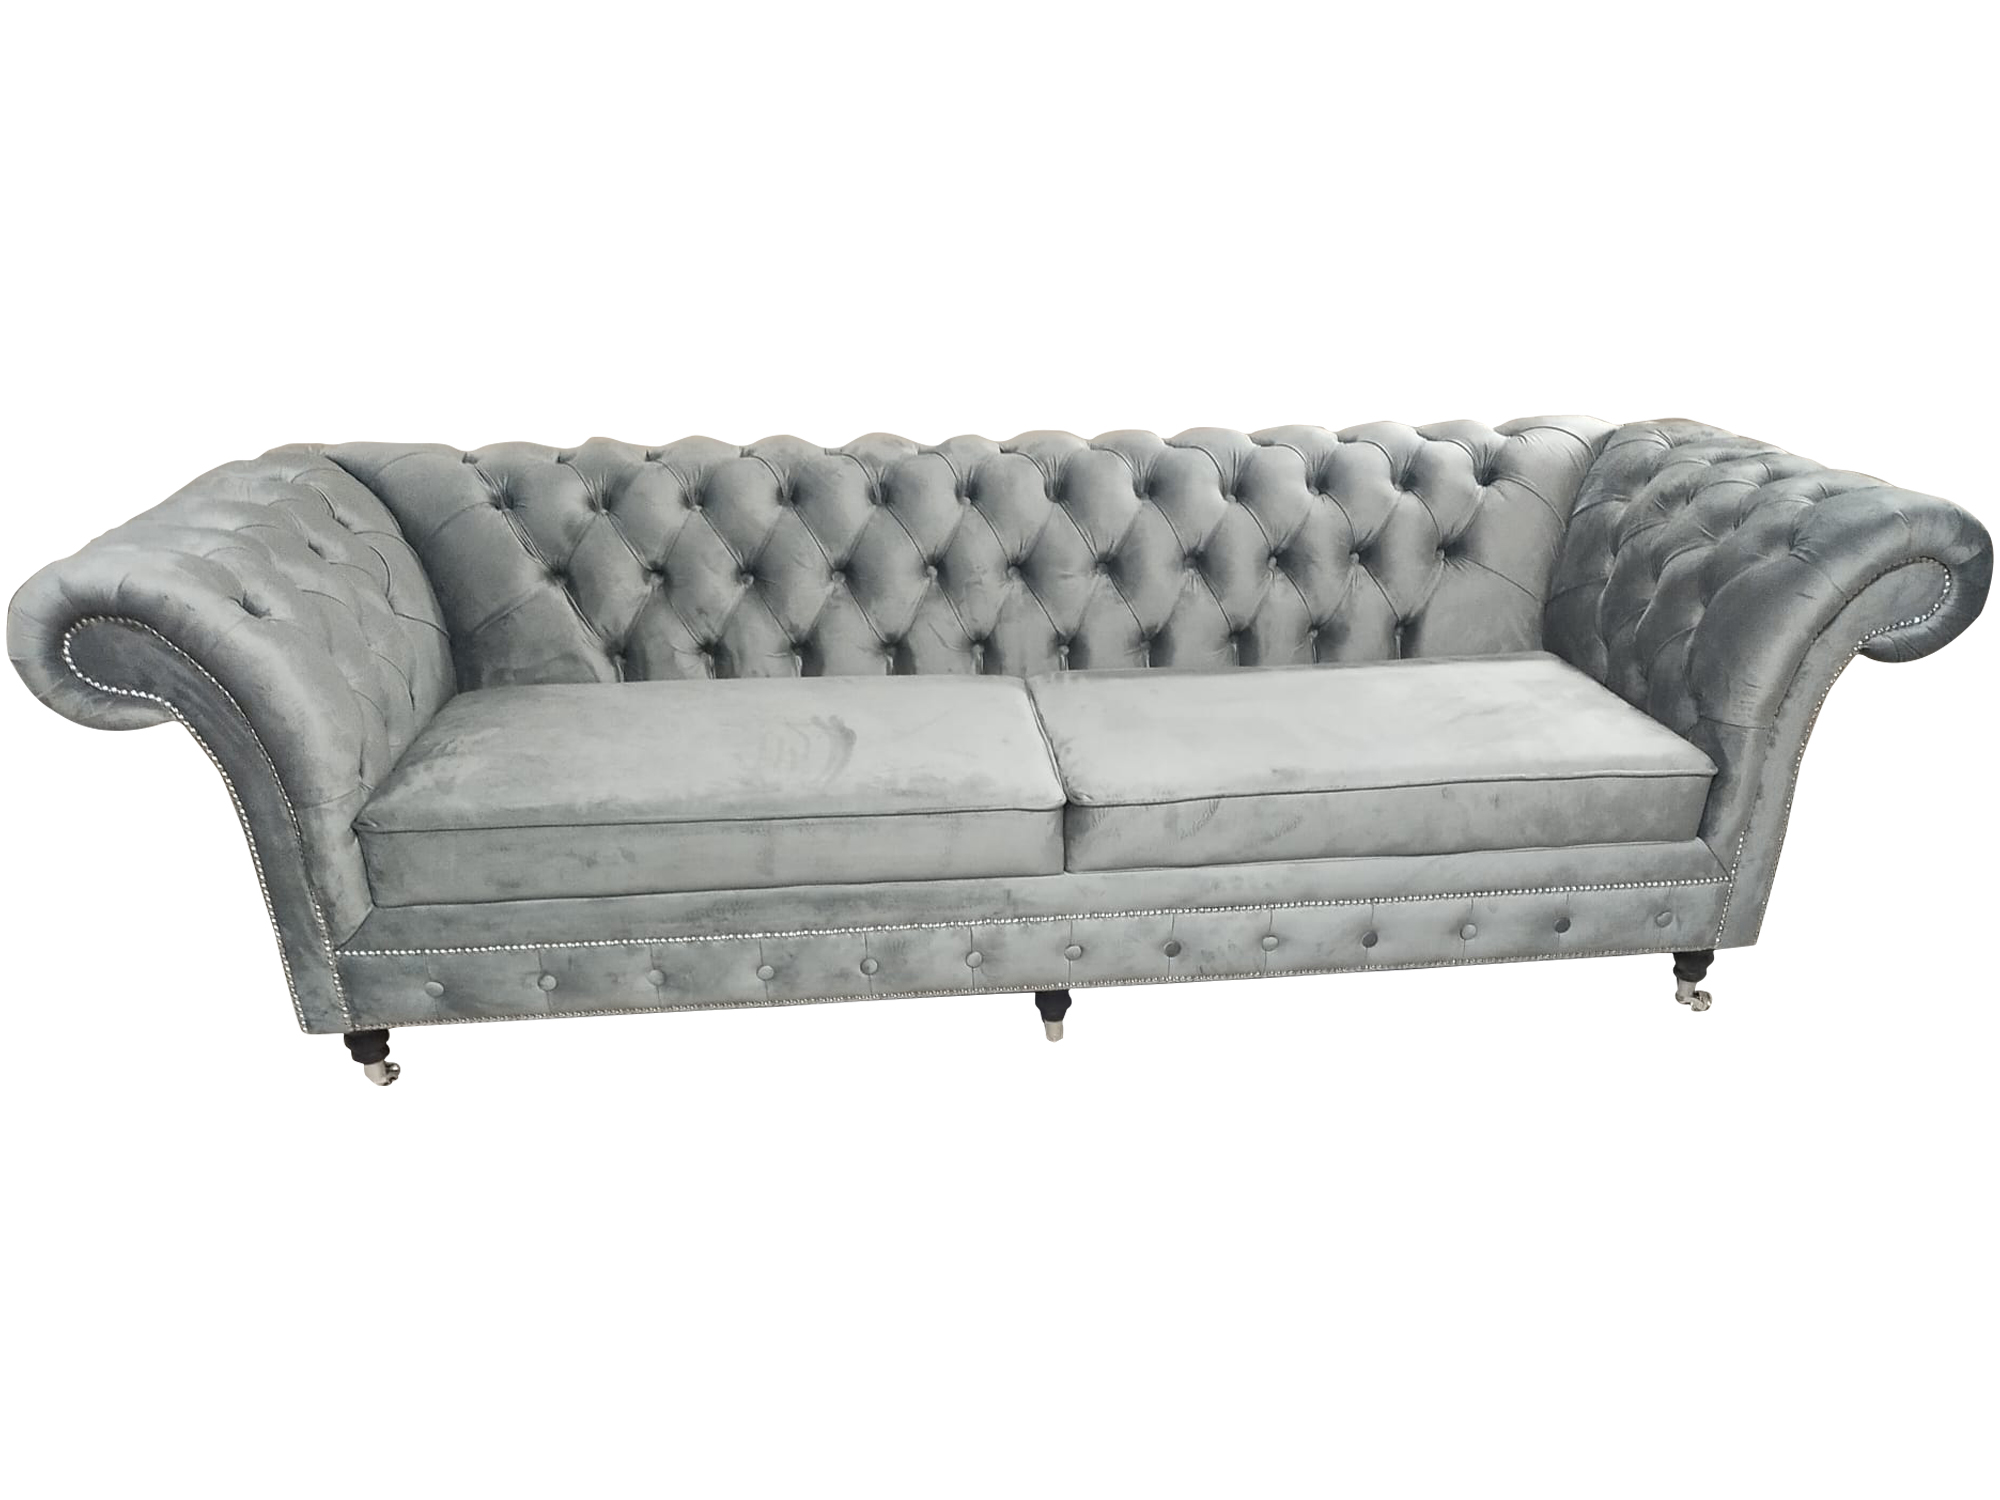 Sofa Chesterfield 3 Seater Couch Textile Fabric Couches Sofas Upholstery 230cm